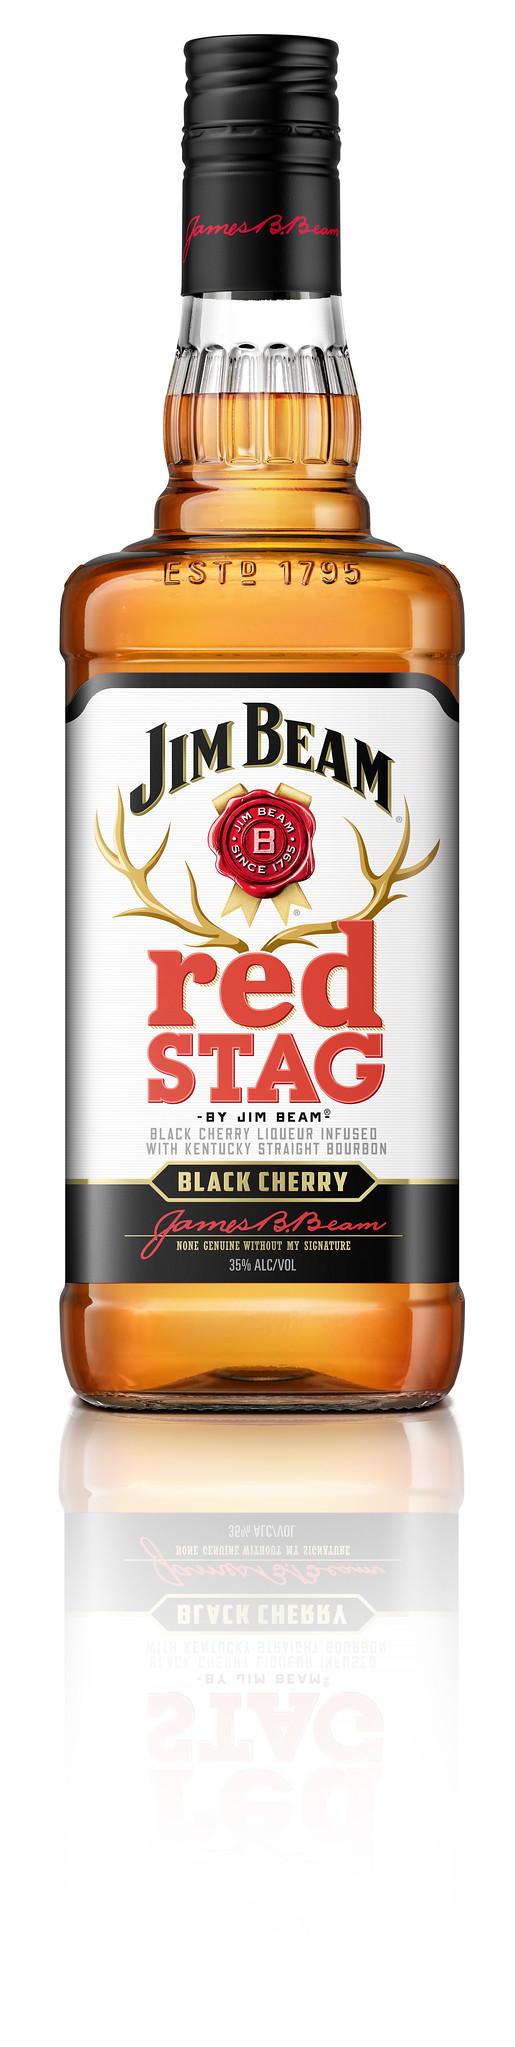 Win Red Stag by Jim Beam